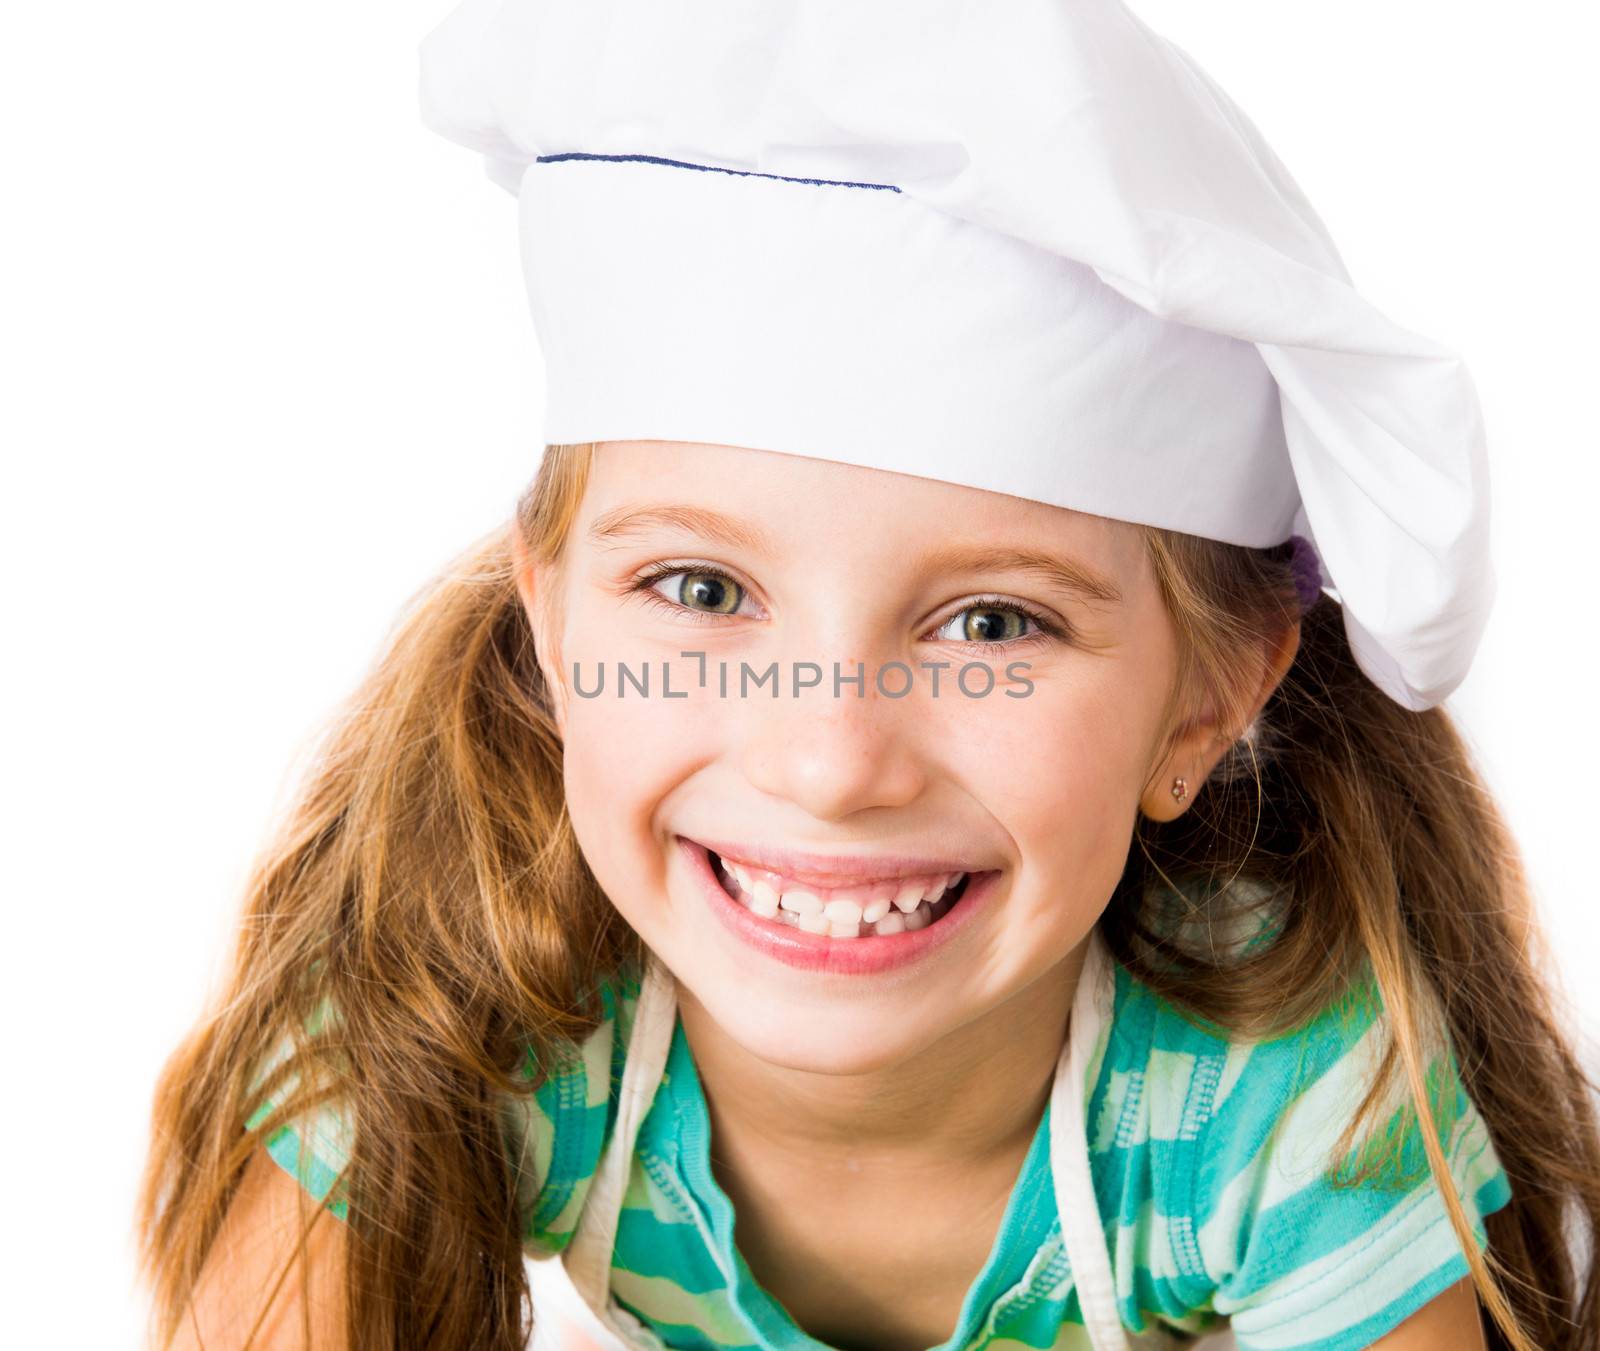 smiling little girl in chef hat on a white background